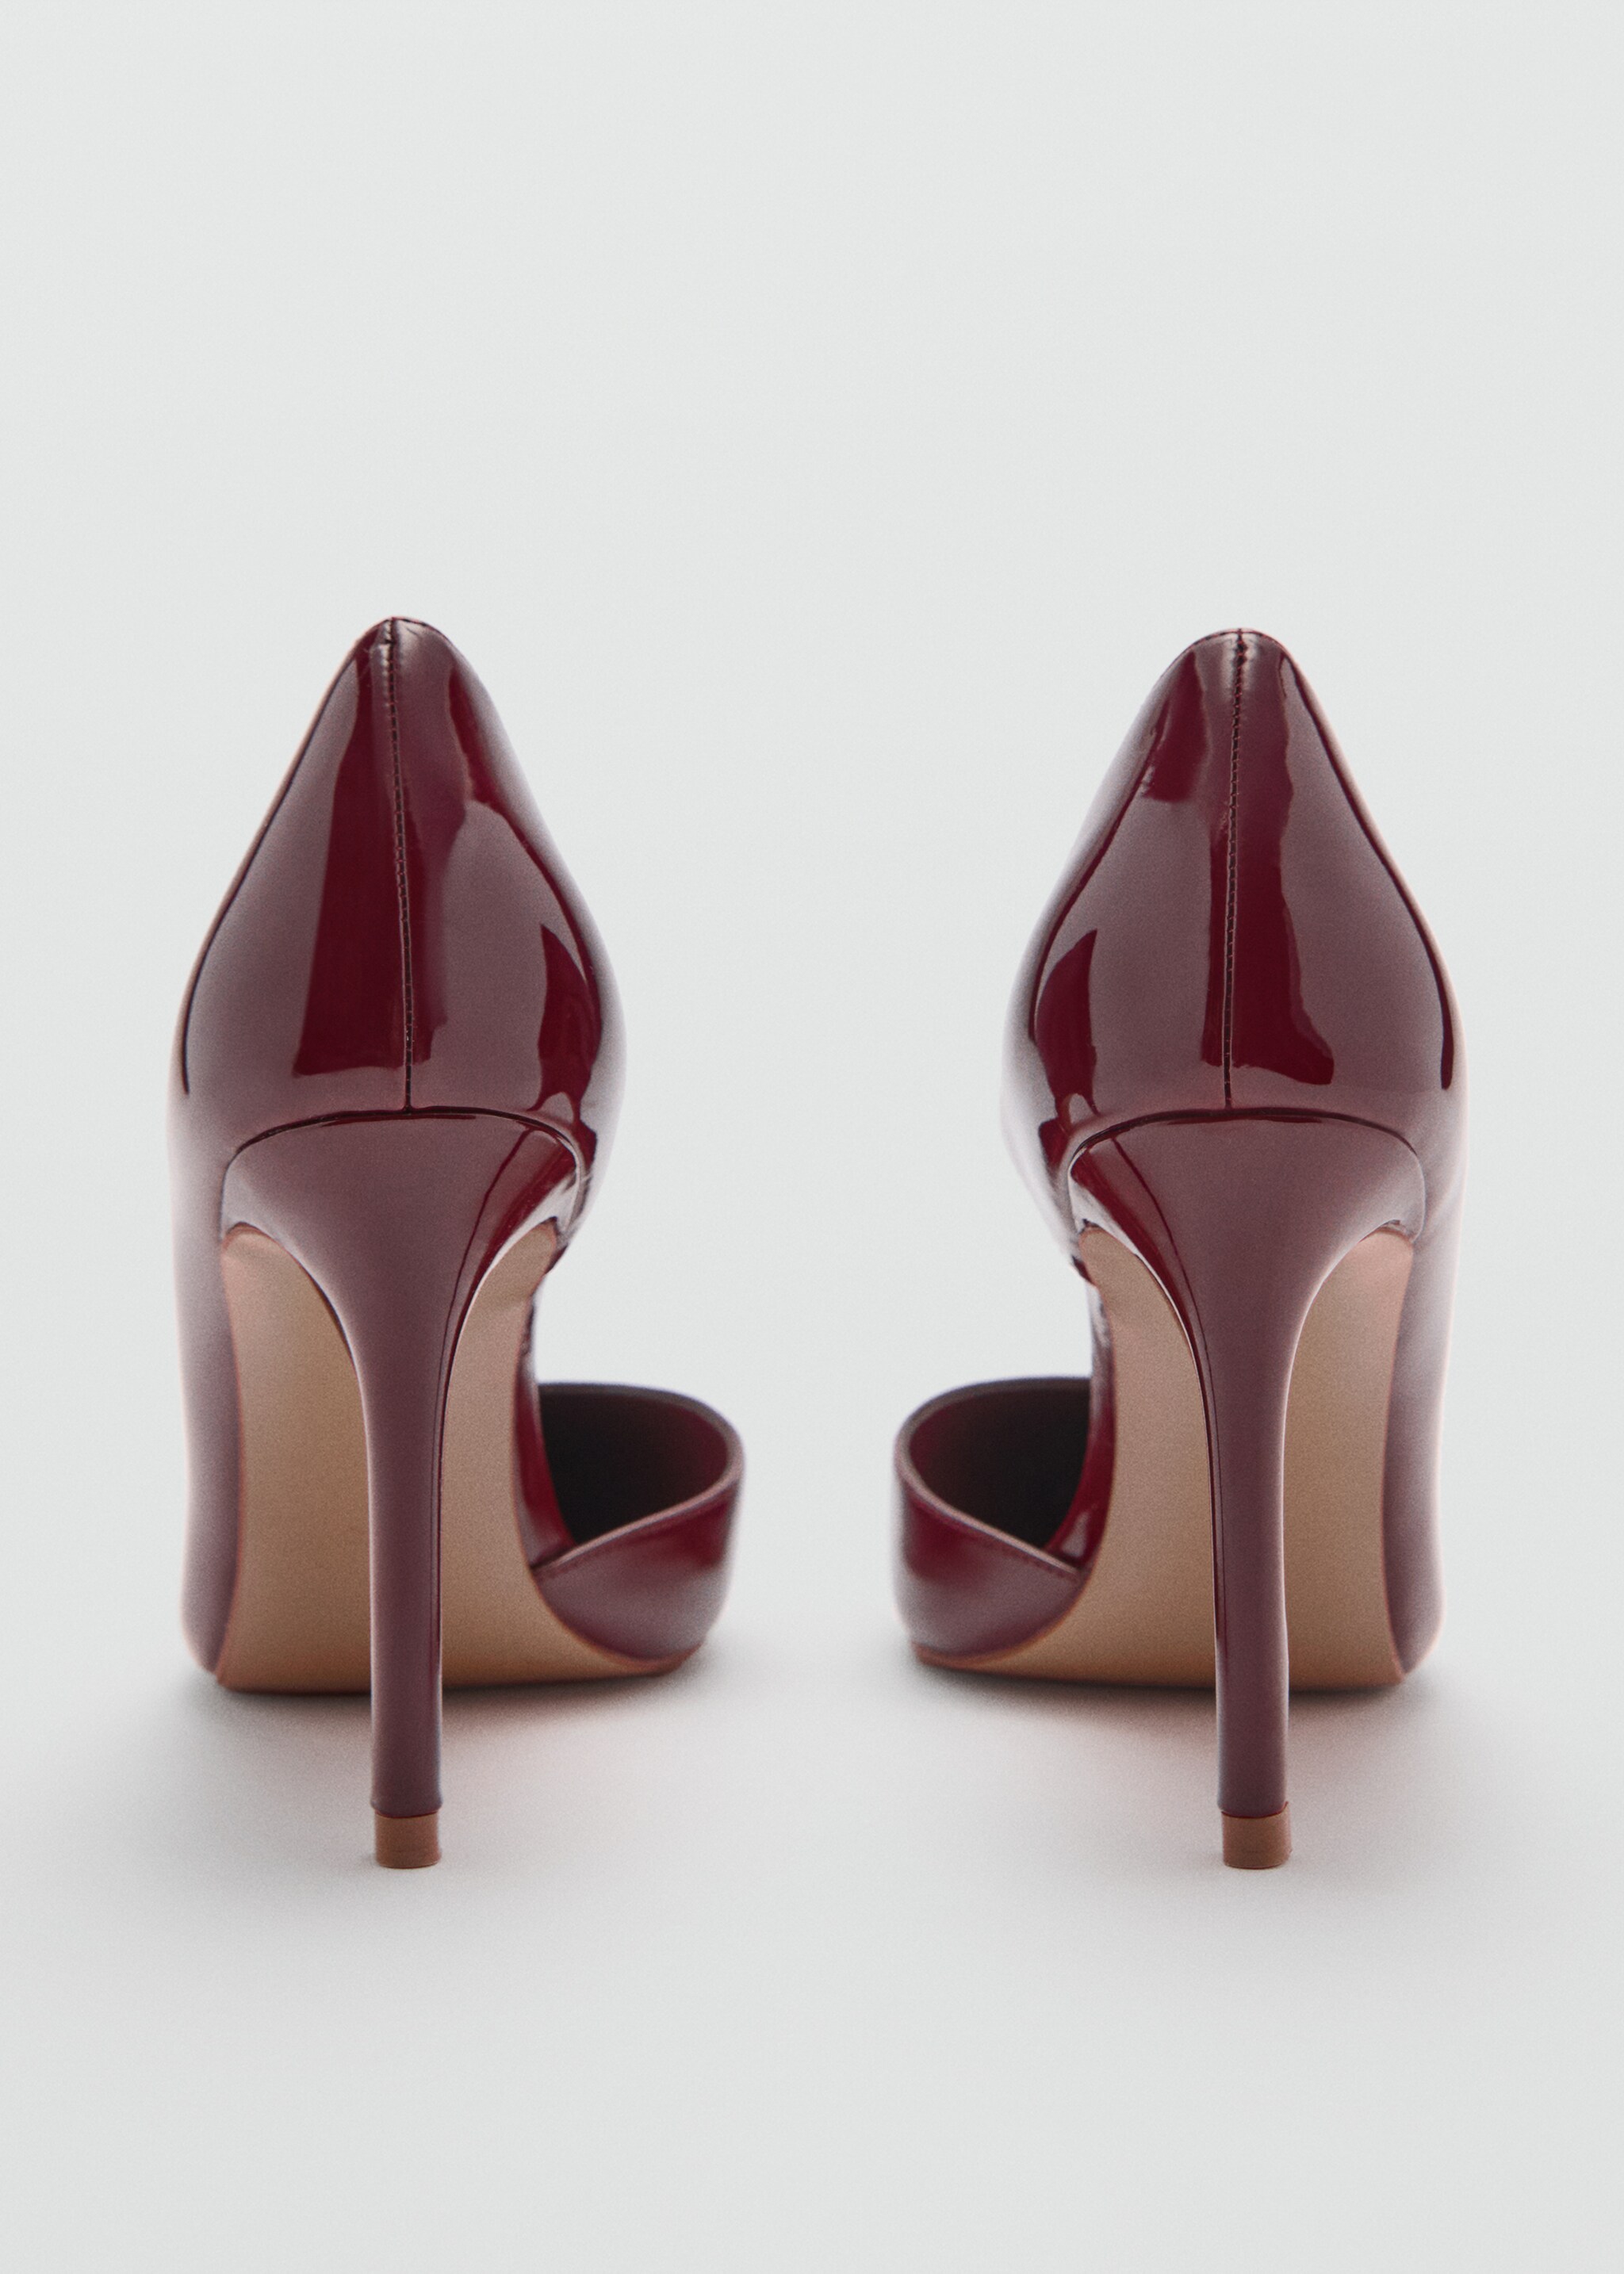 Asymmetrical heeled shoes - Details of the article 1